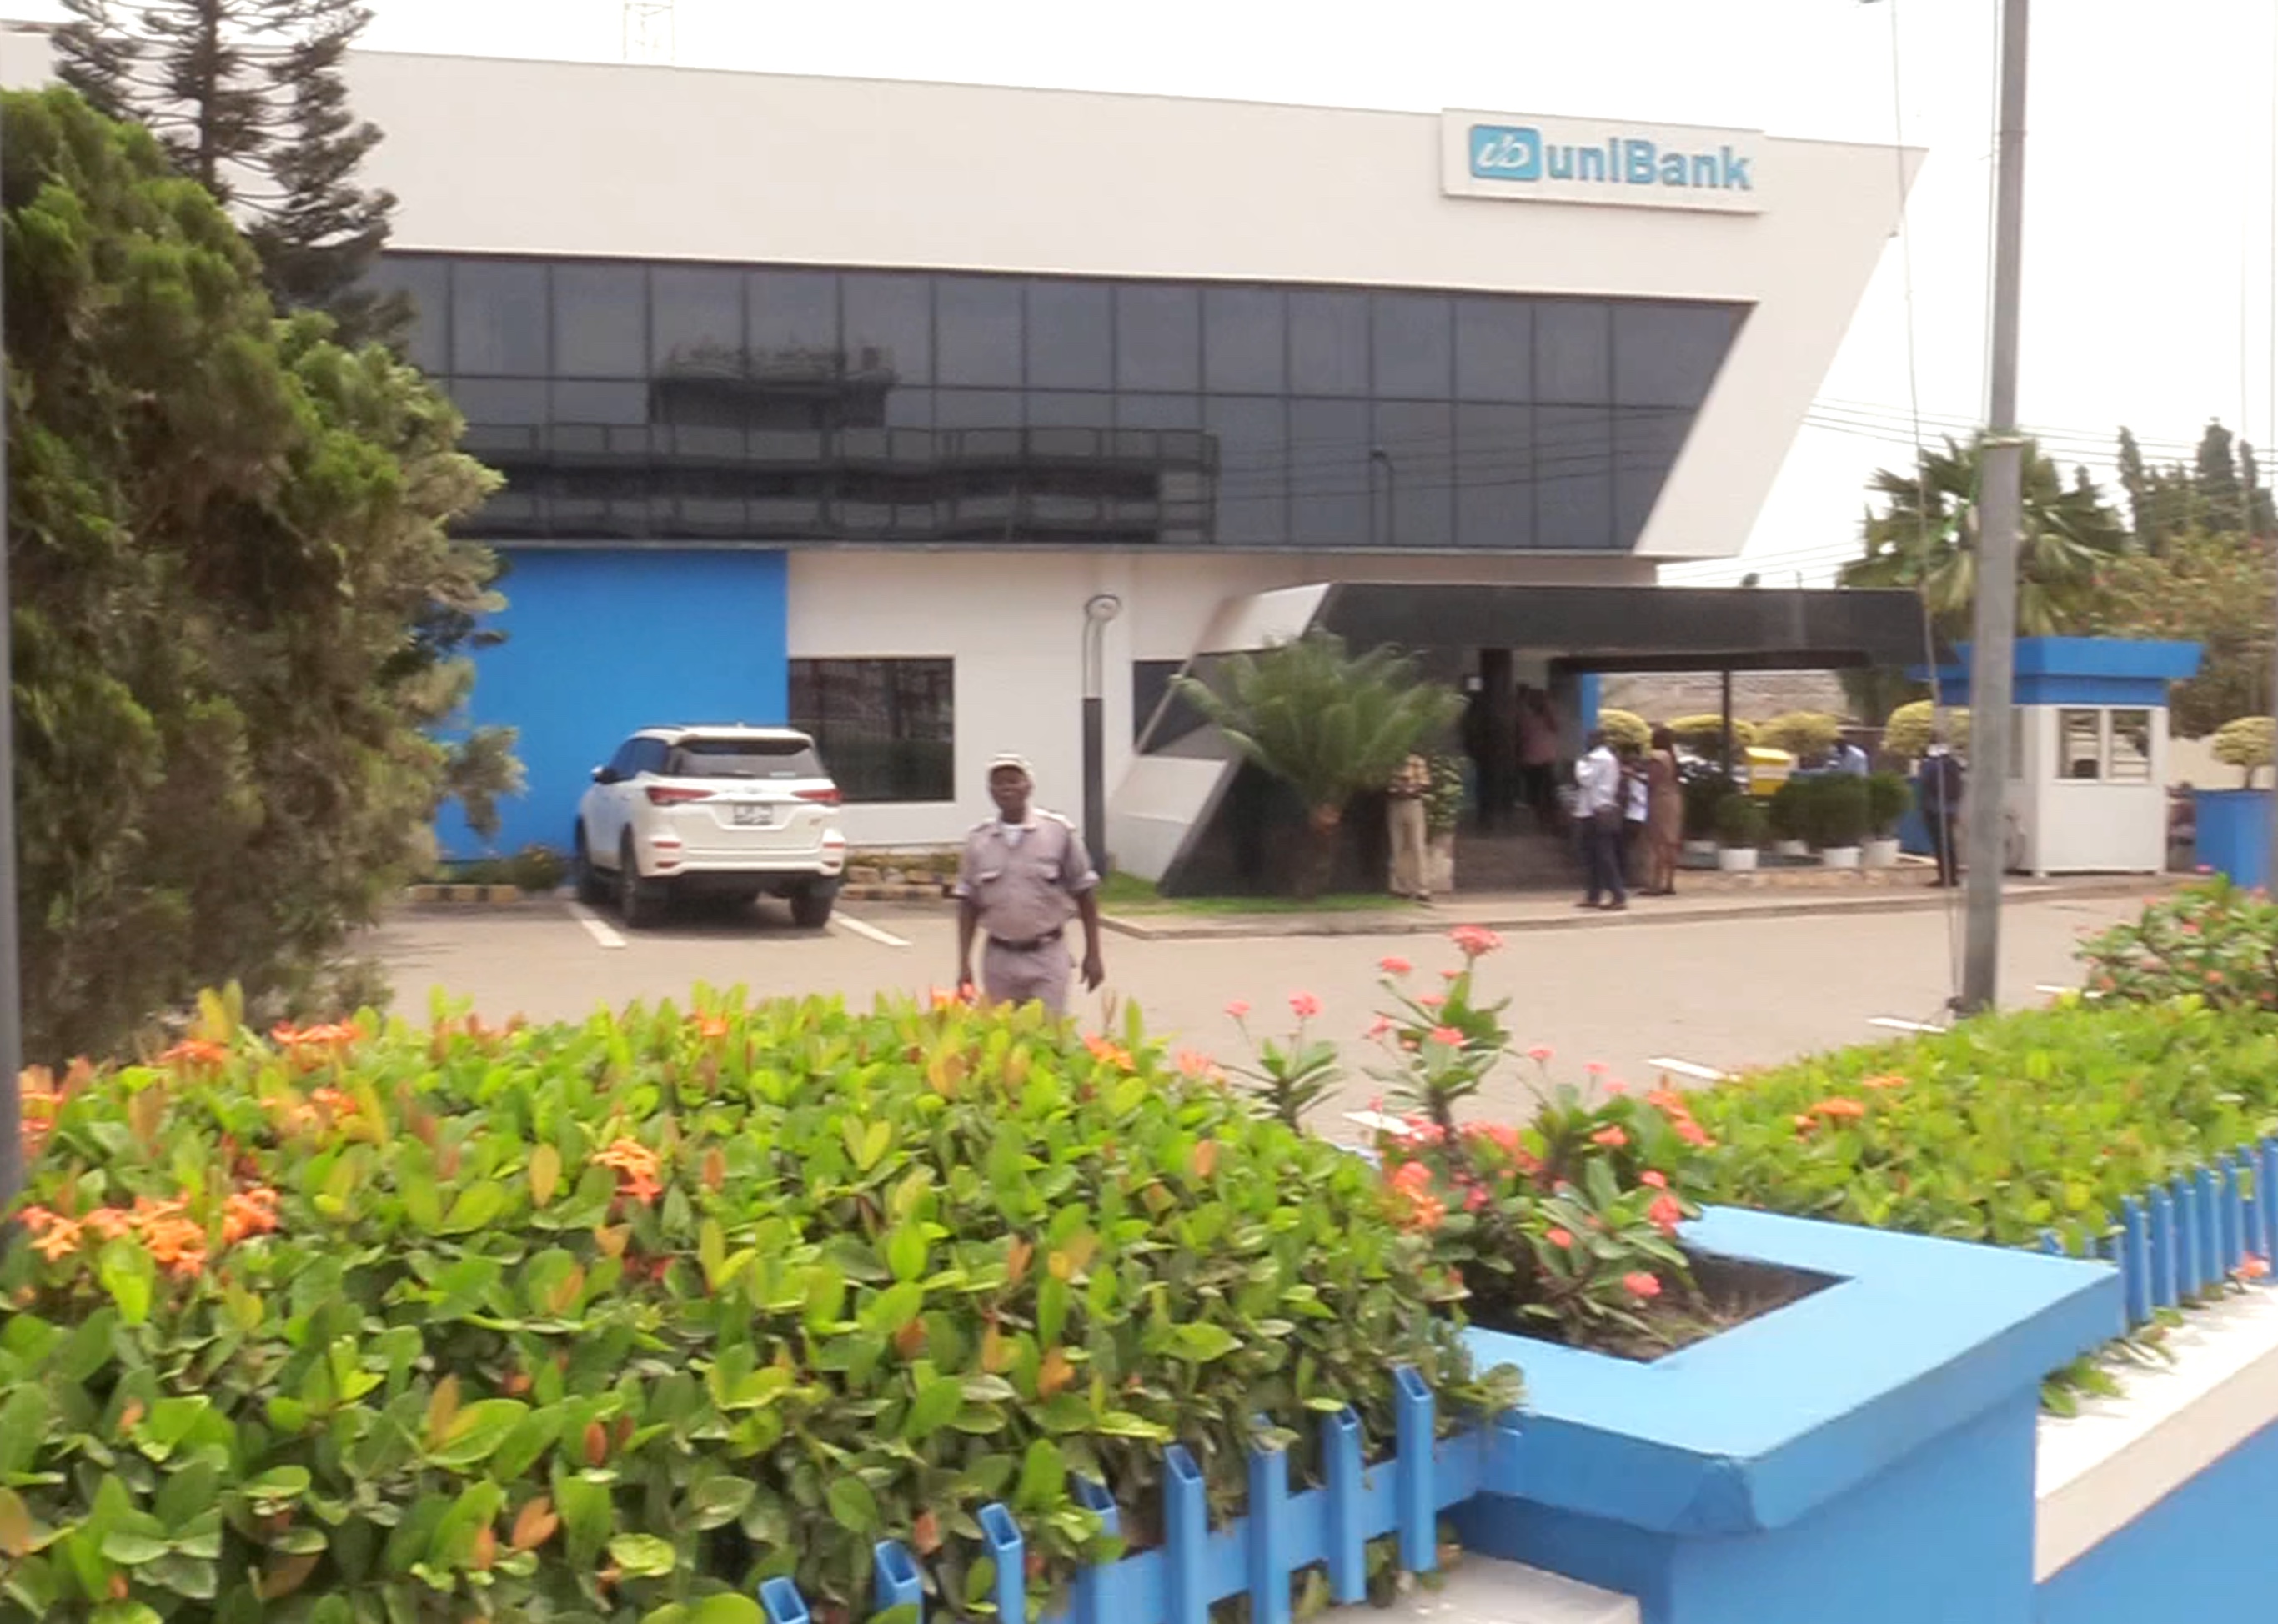 Ghanaians react to uniBank's takeover